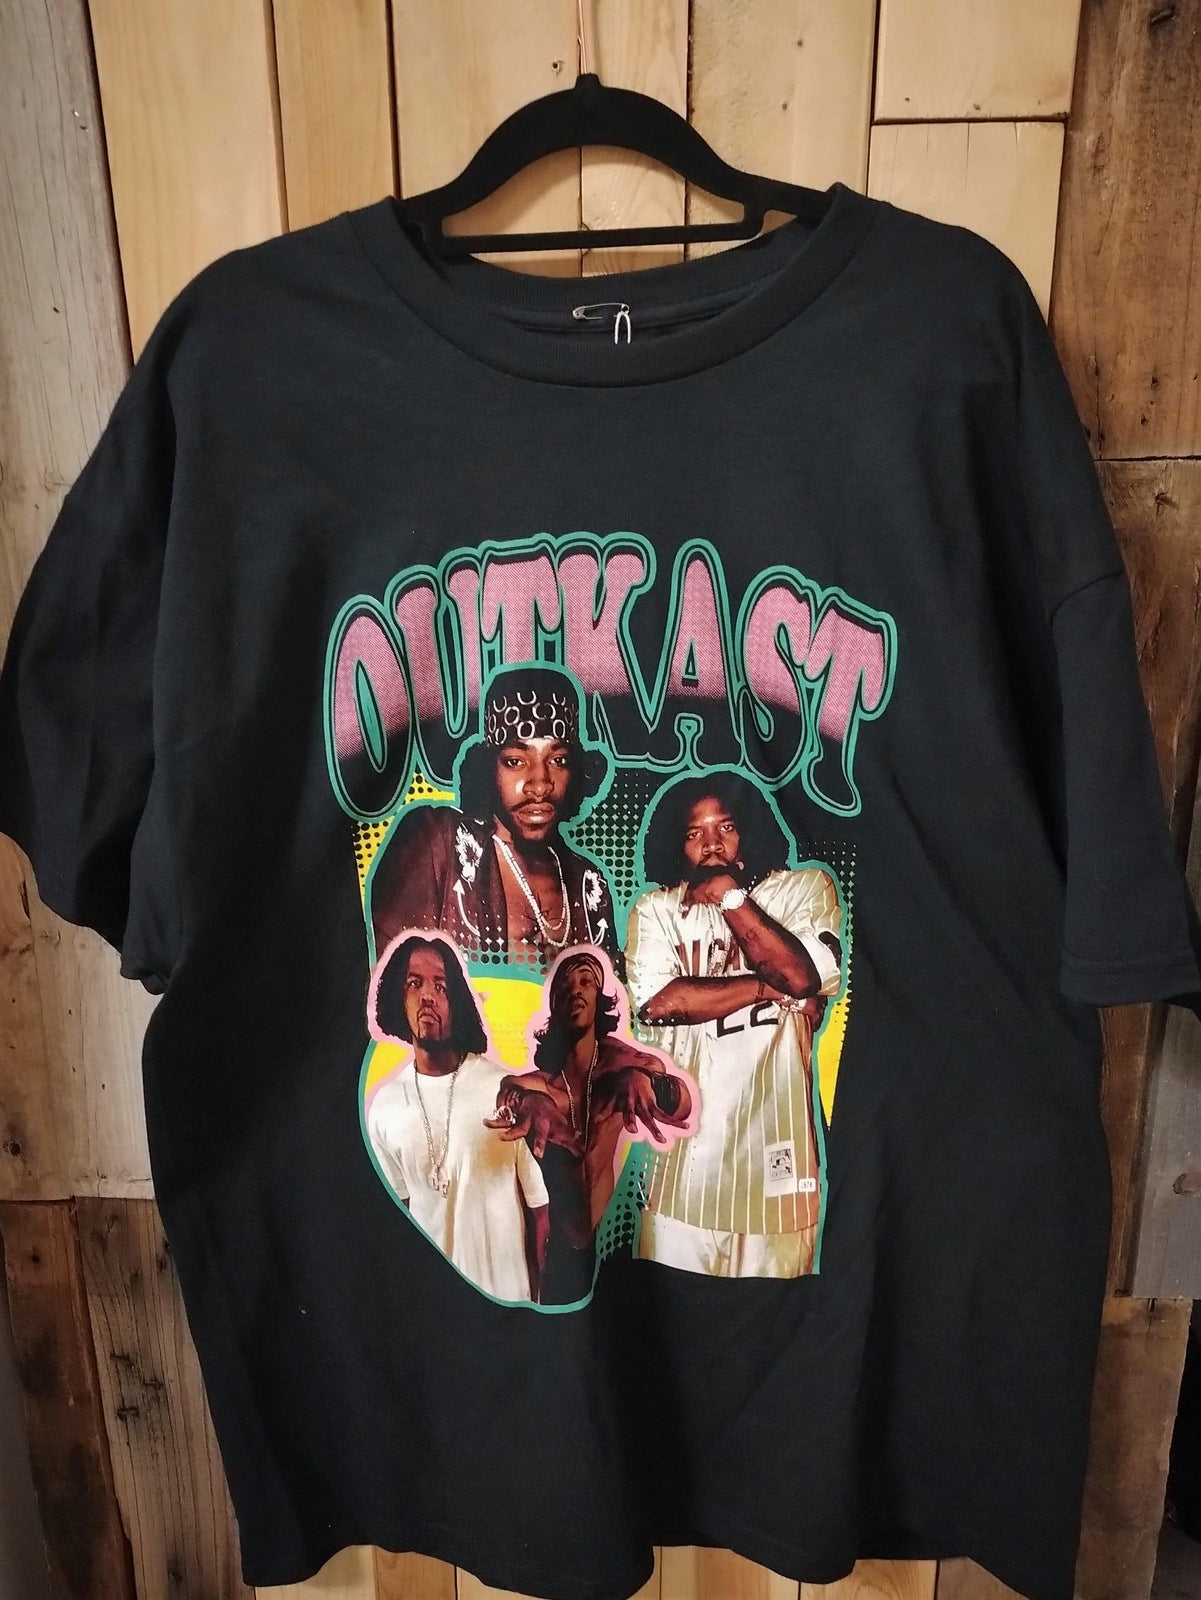 Outkast Tee Shirt Size Small- New